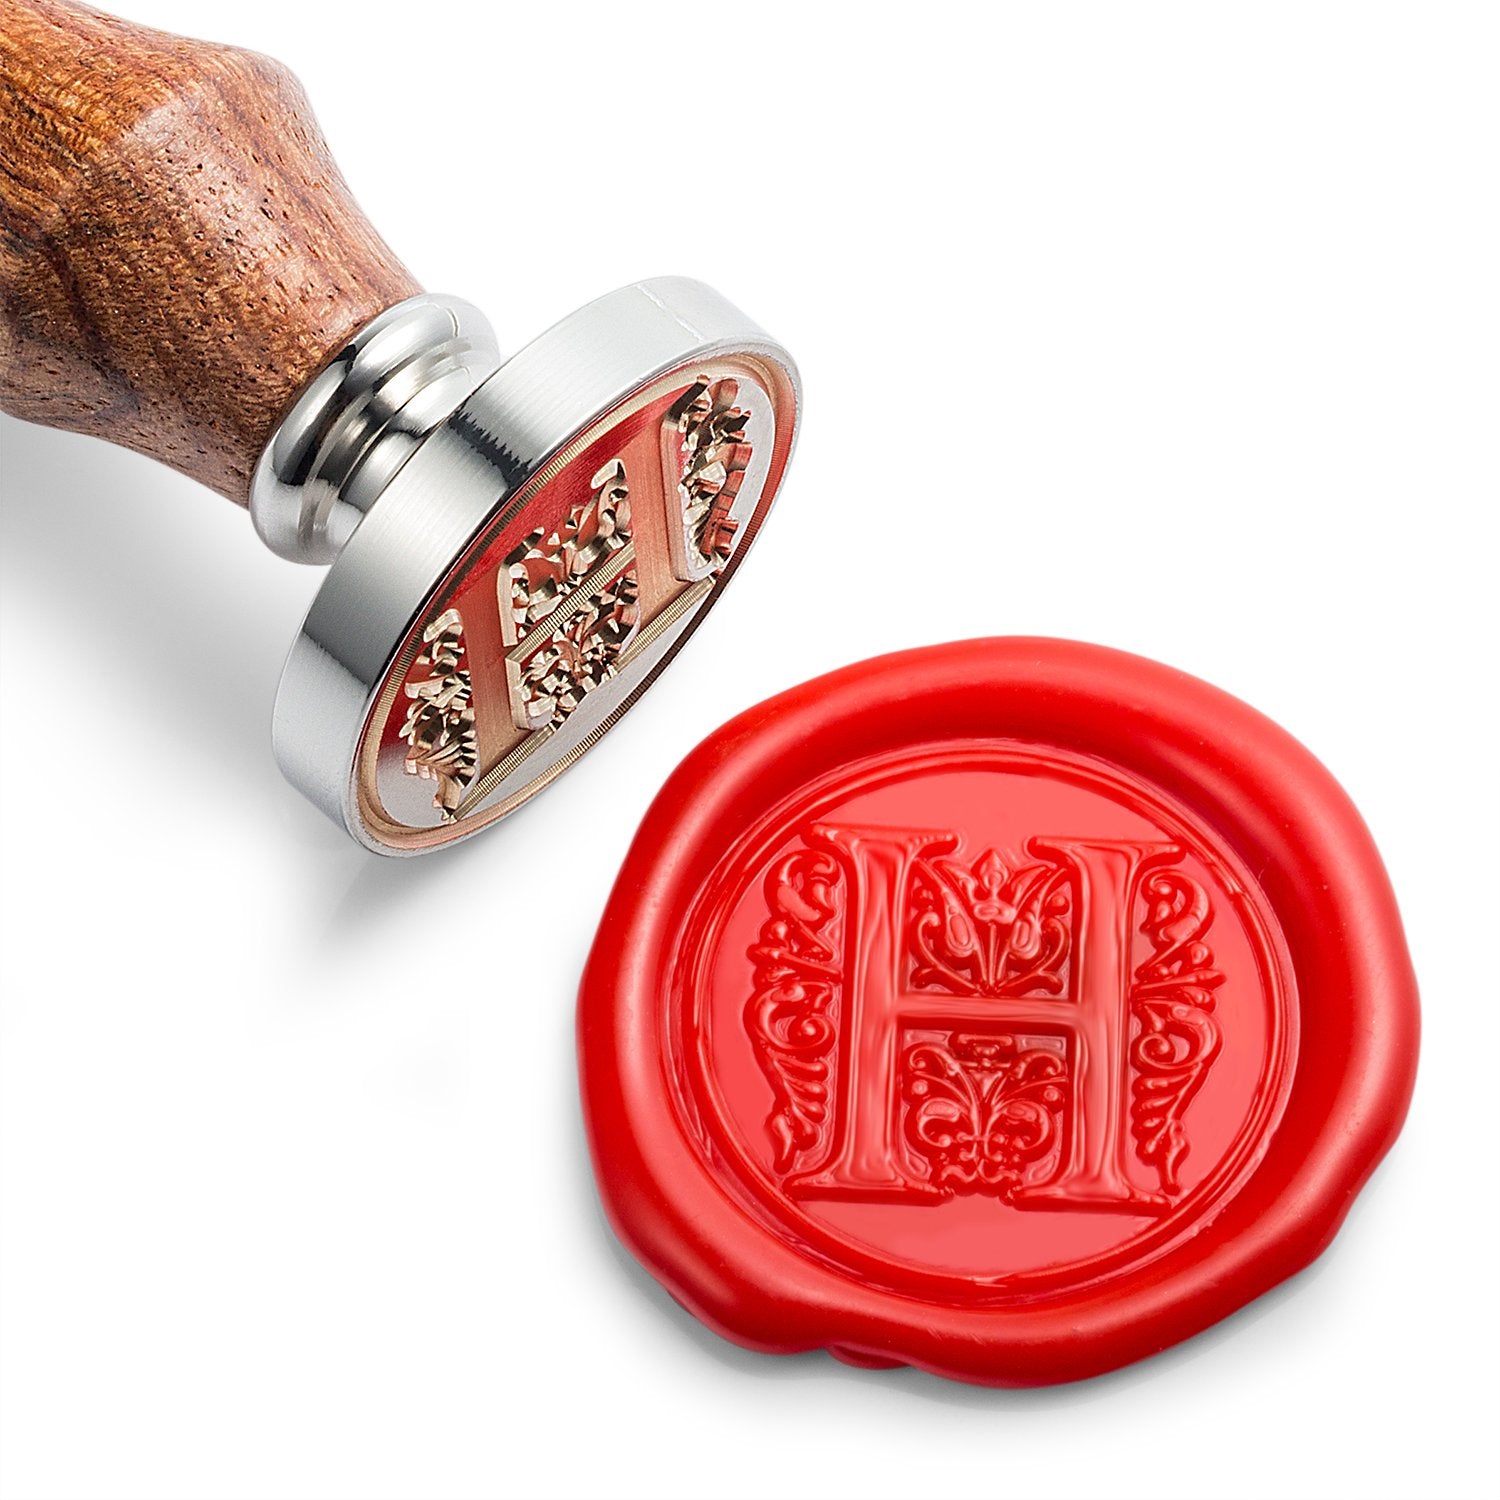 Single Letter Wax Seal Stamp